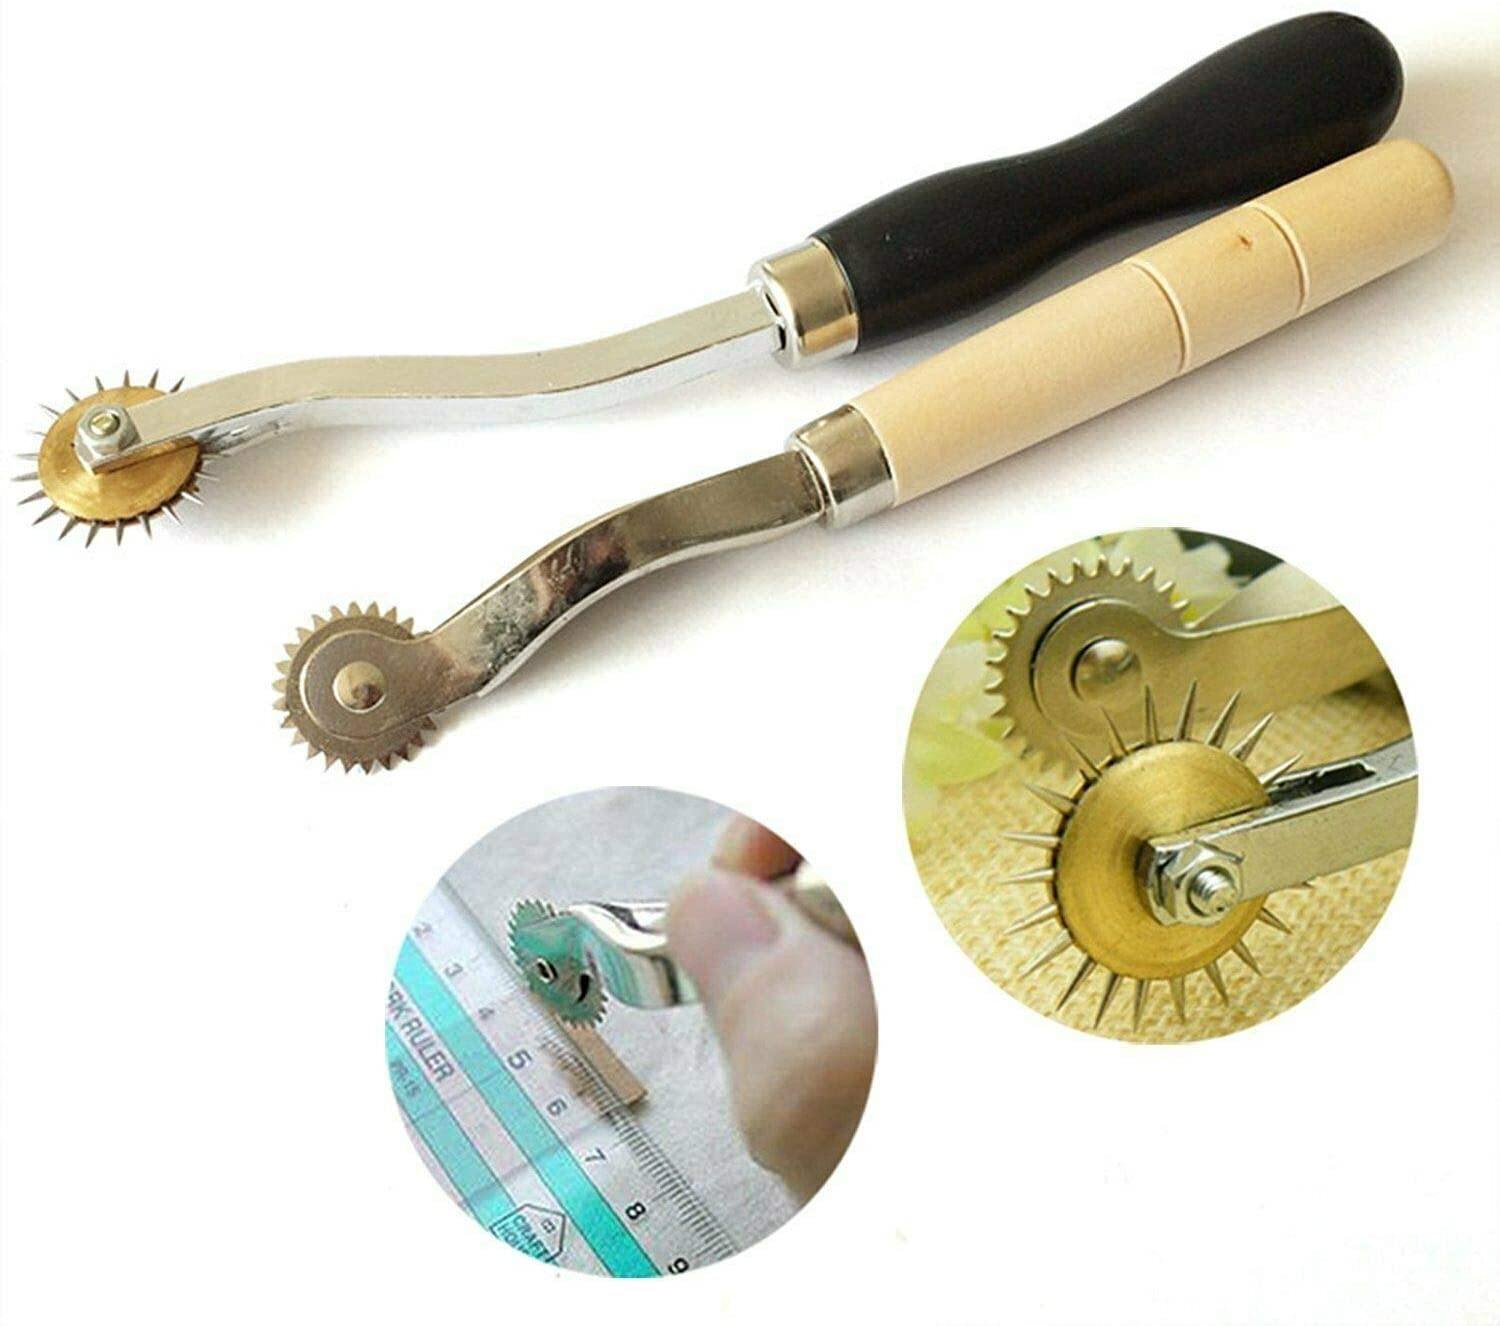 Leather Groover Tool,Knoweasy 7 in 1 Pro Stitching Groover and